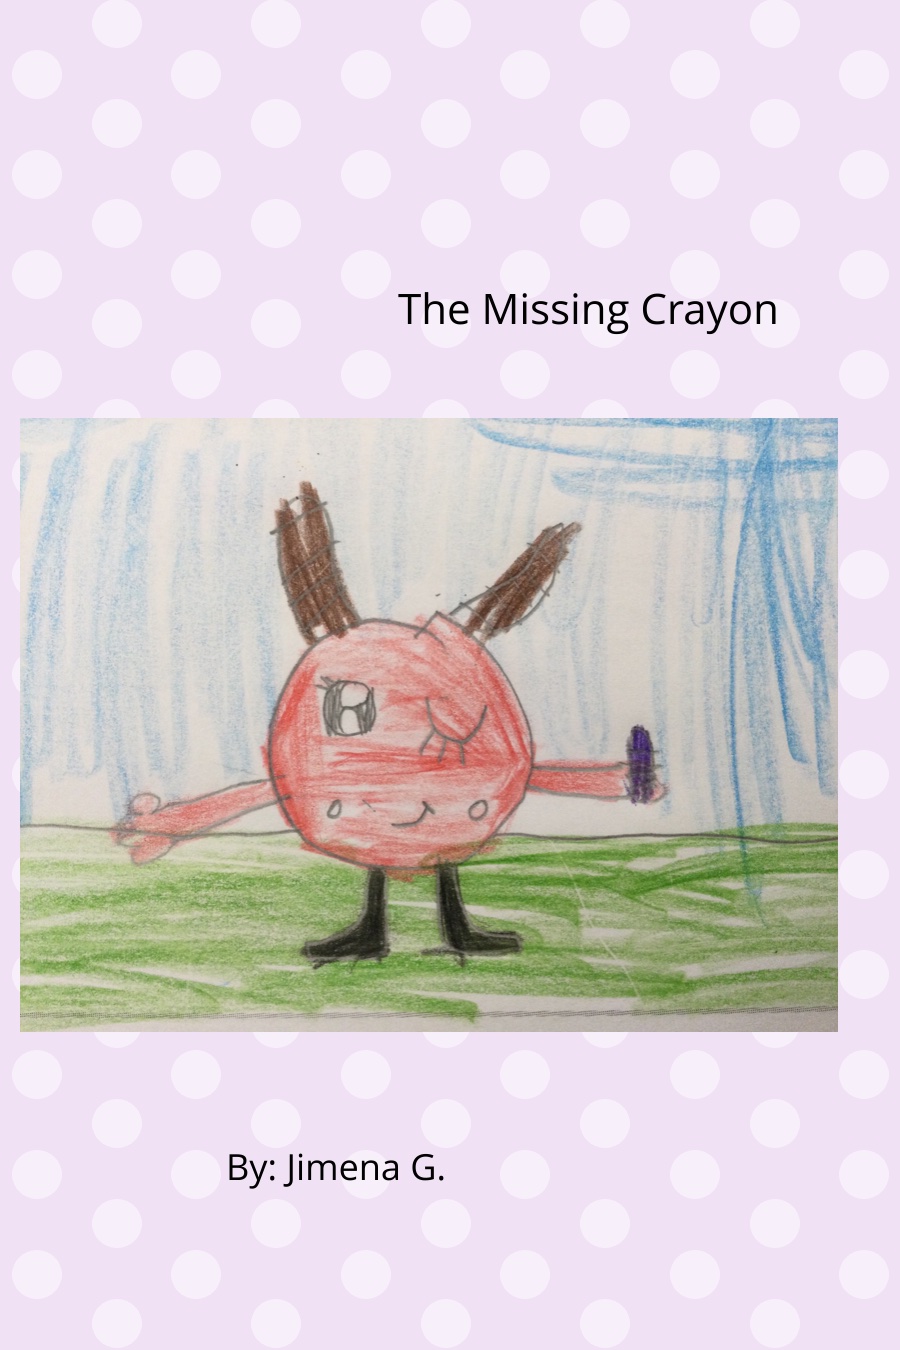 The Missing Crayon by Jimena G